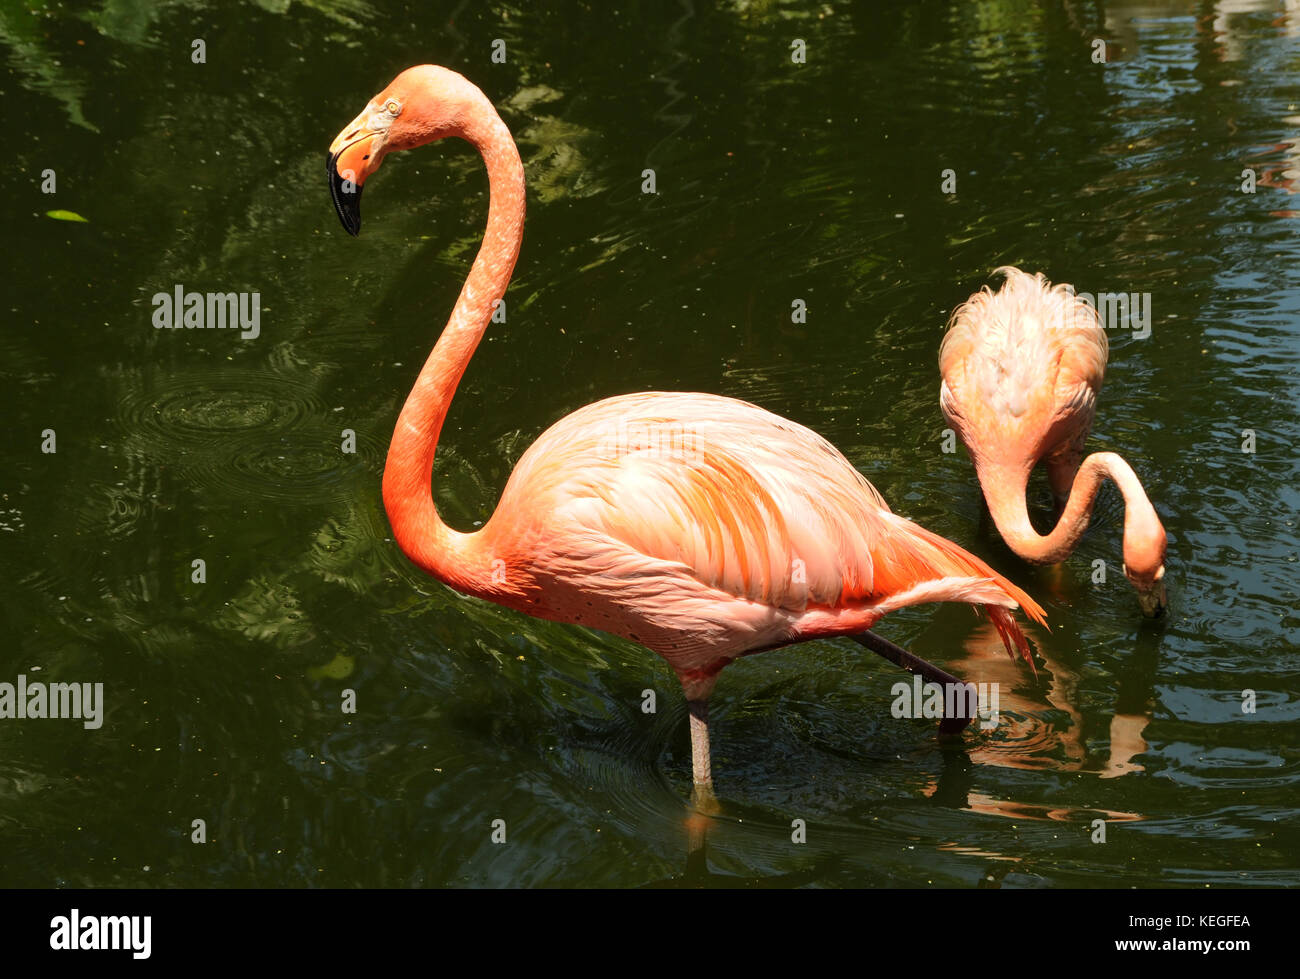 Two large Caribbean flamingo birds wading in water Stock Photo